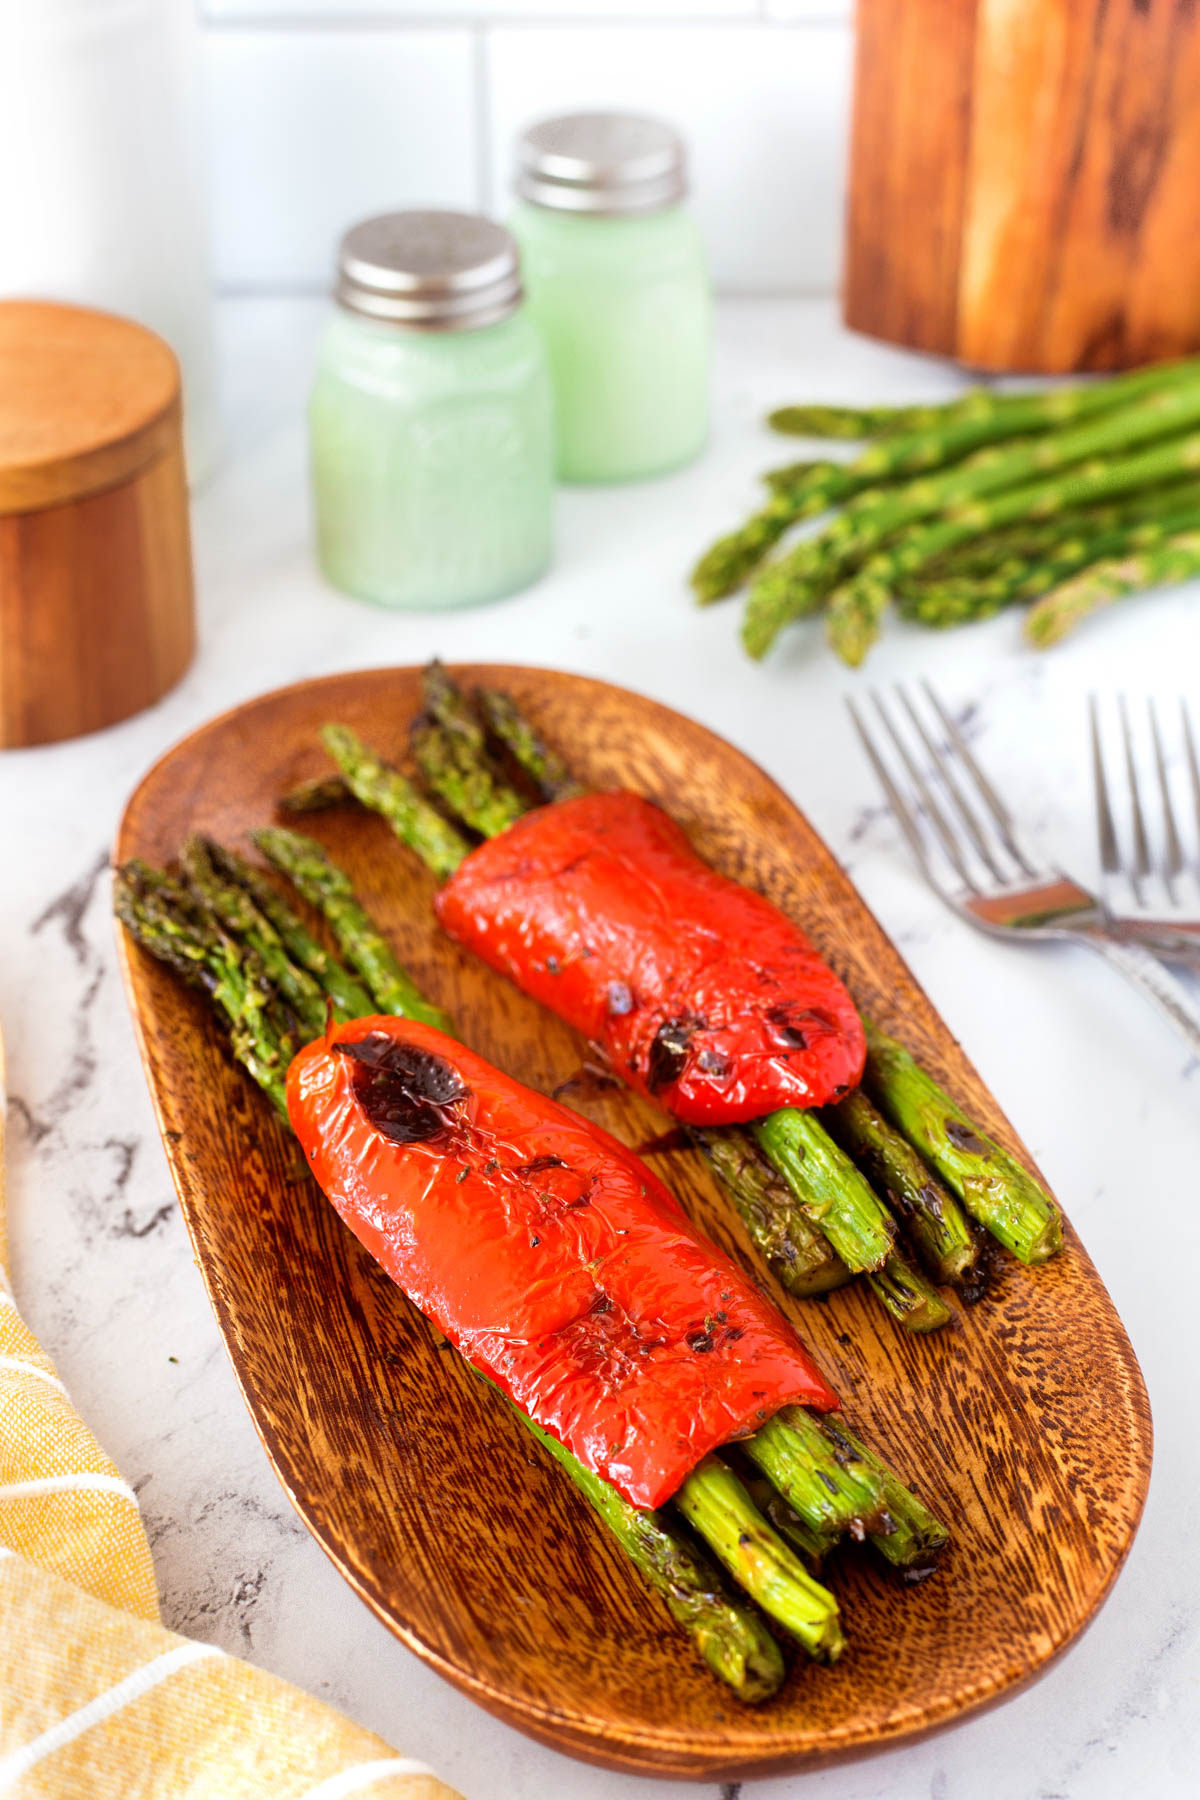 Grilled Asparagus bundles with the twine removed on a wooden board.